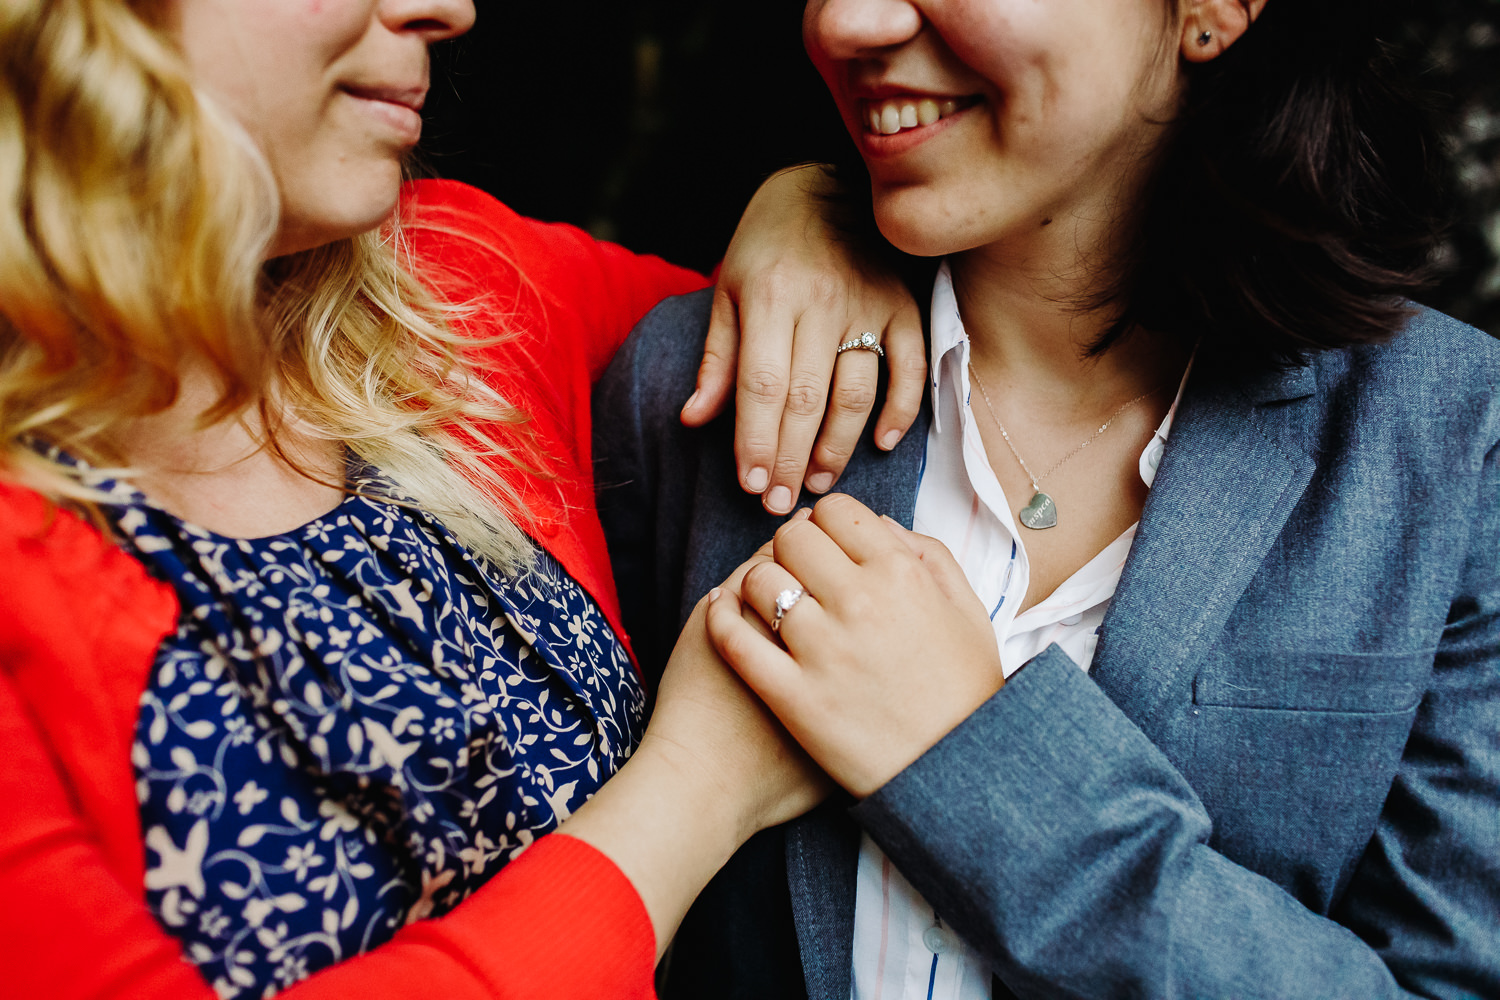 two women and their engagement rings